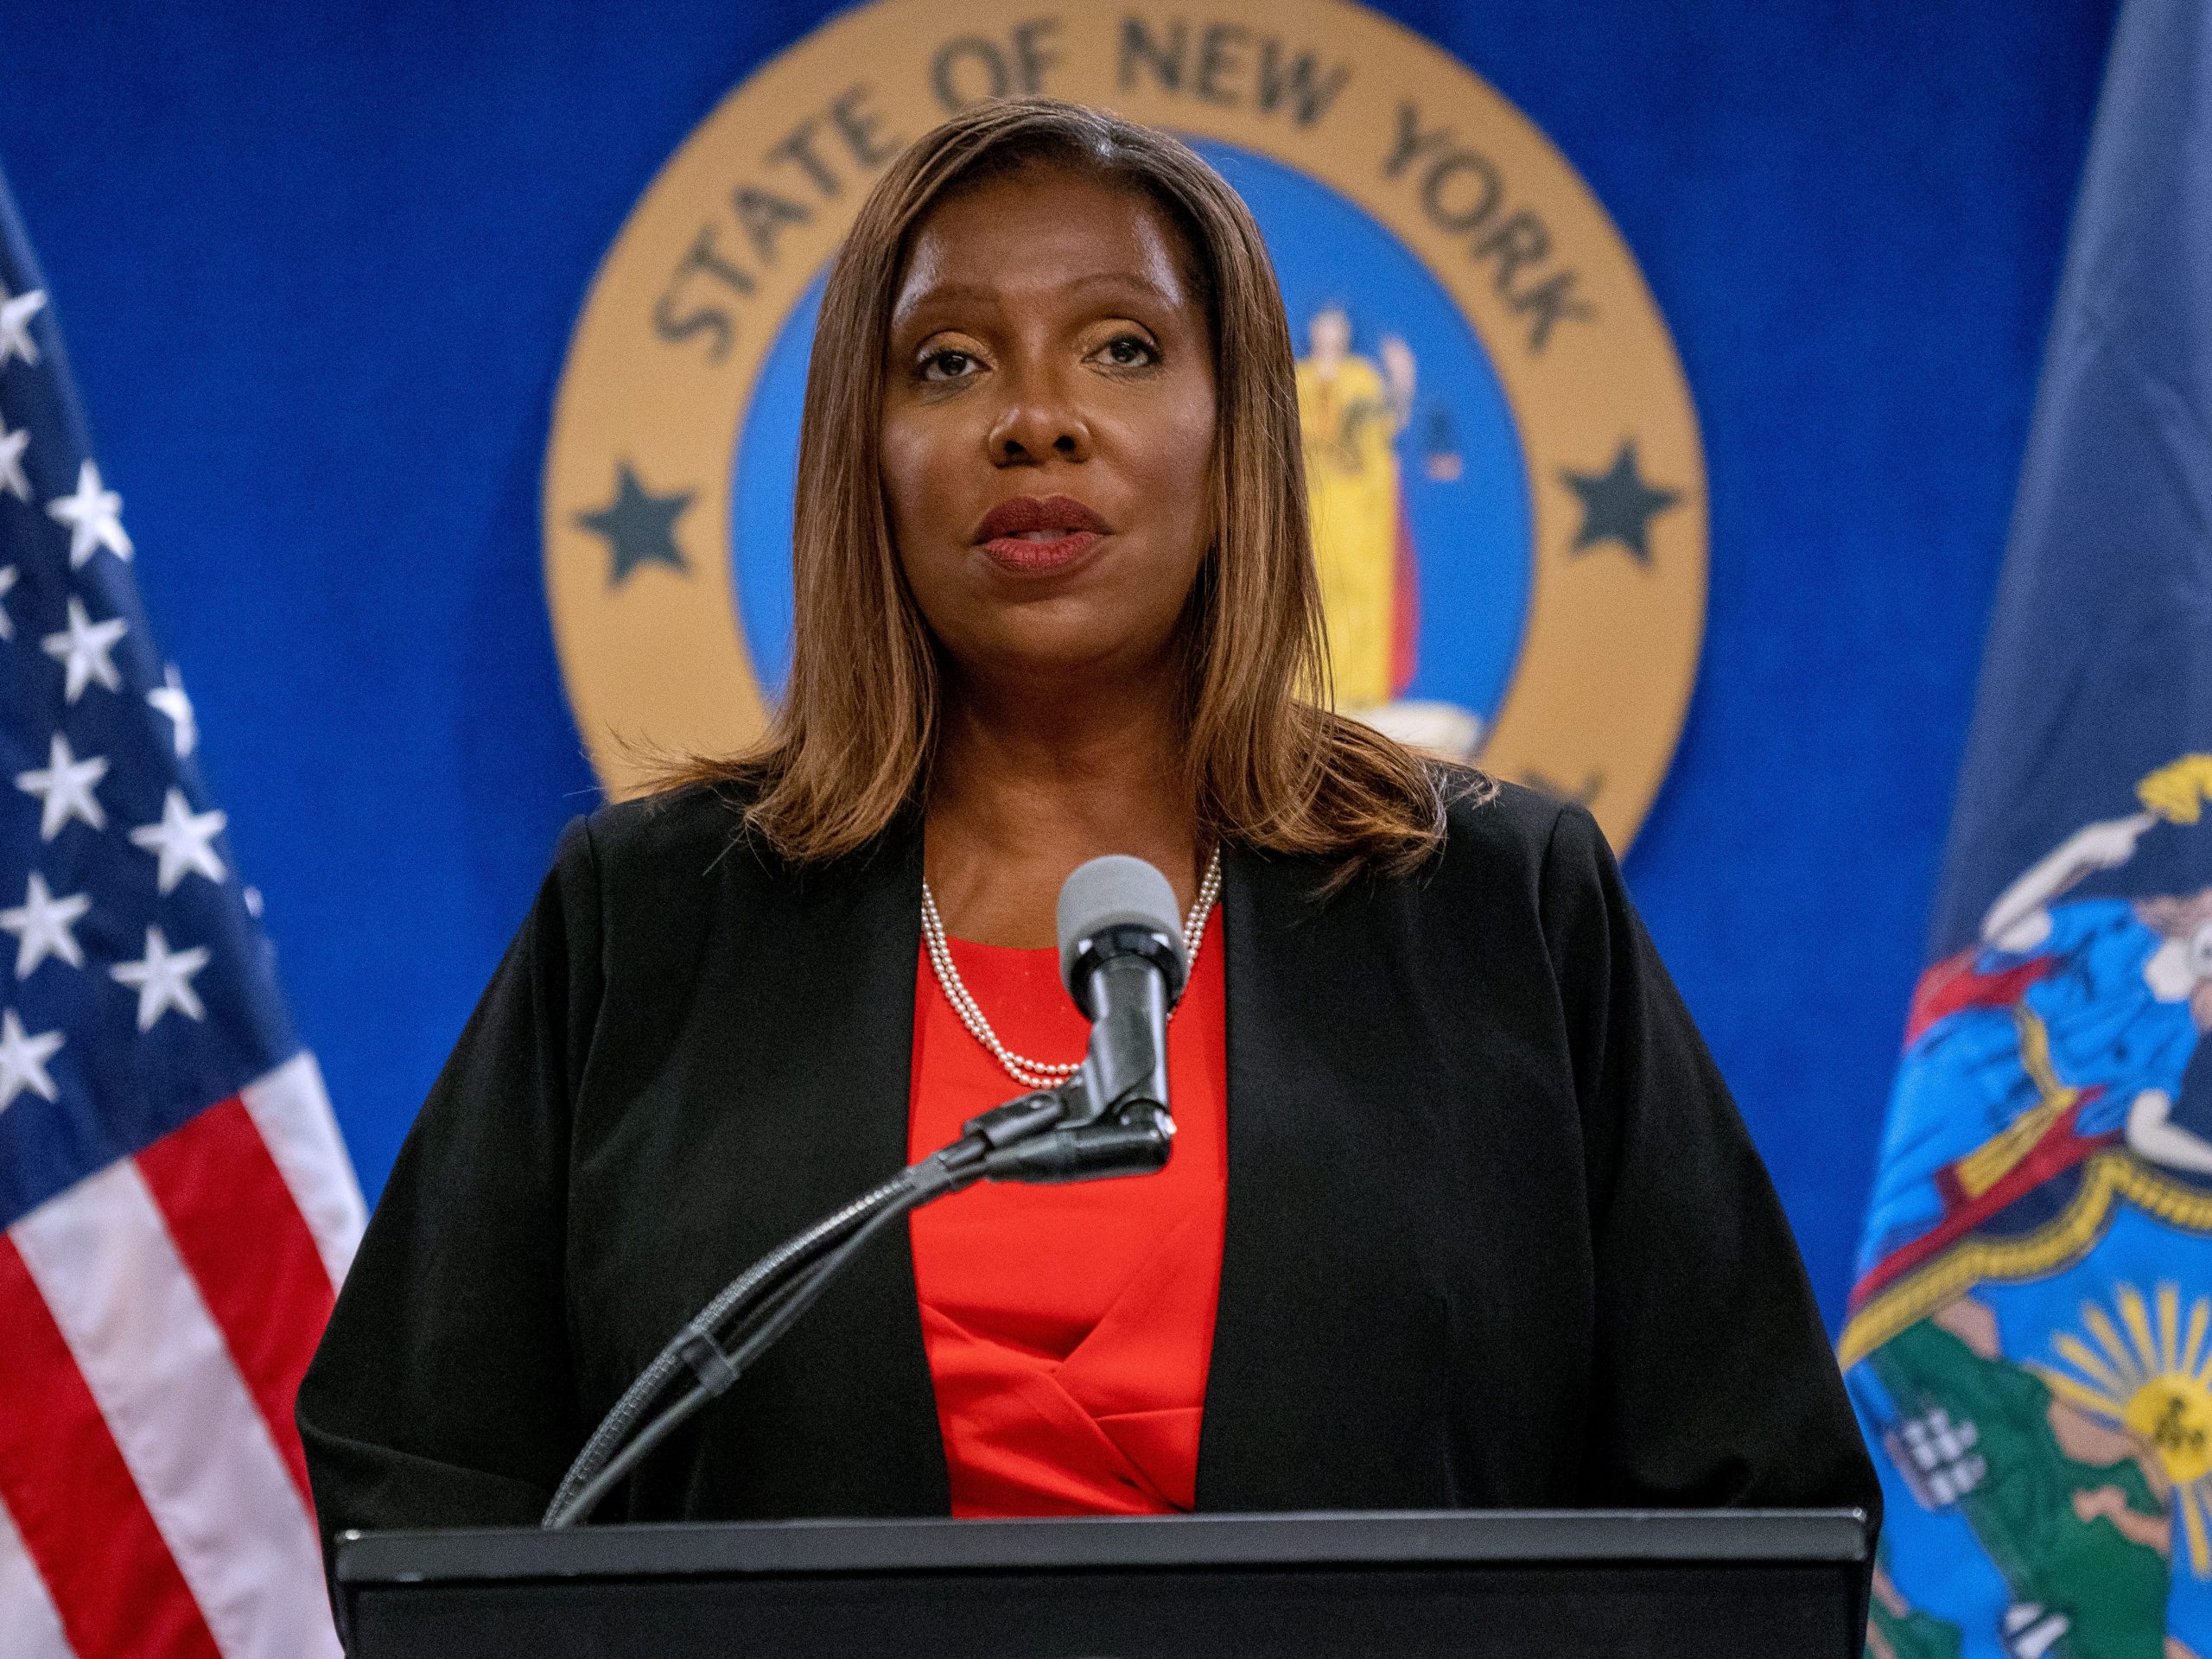 New York Attorney General Letitia James presents the findings of an independent investigation into accusations by multiple women that New York Governor Andrew Cuomo sexually harassed them on August 3, 2021 in New York City.